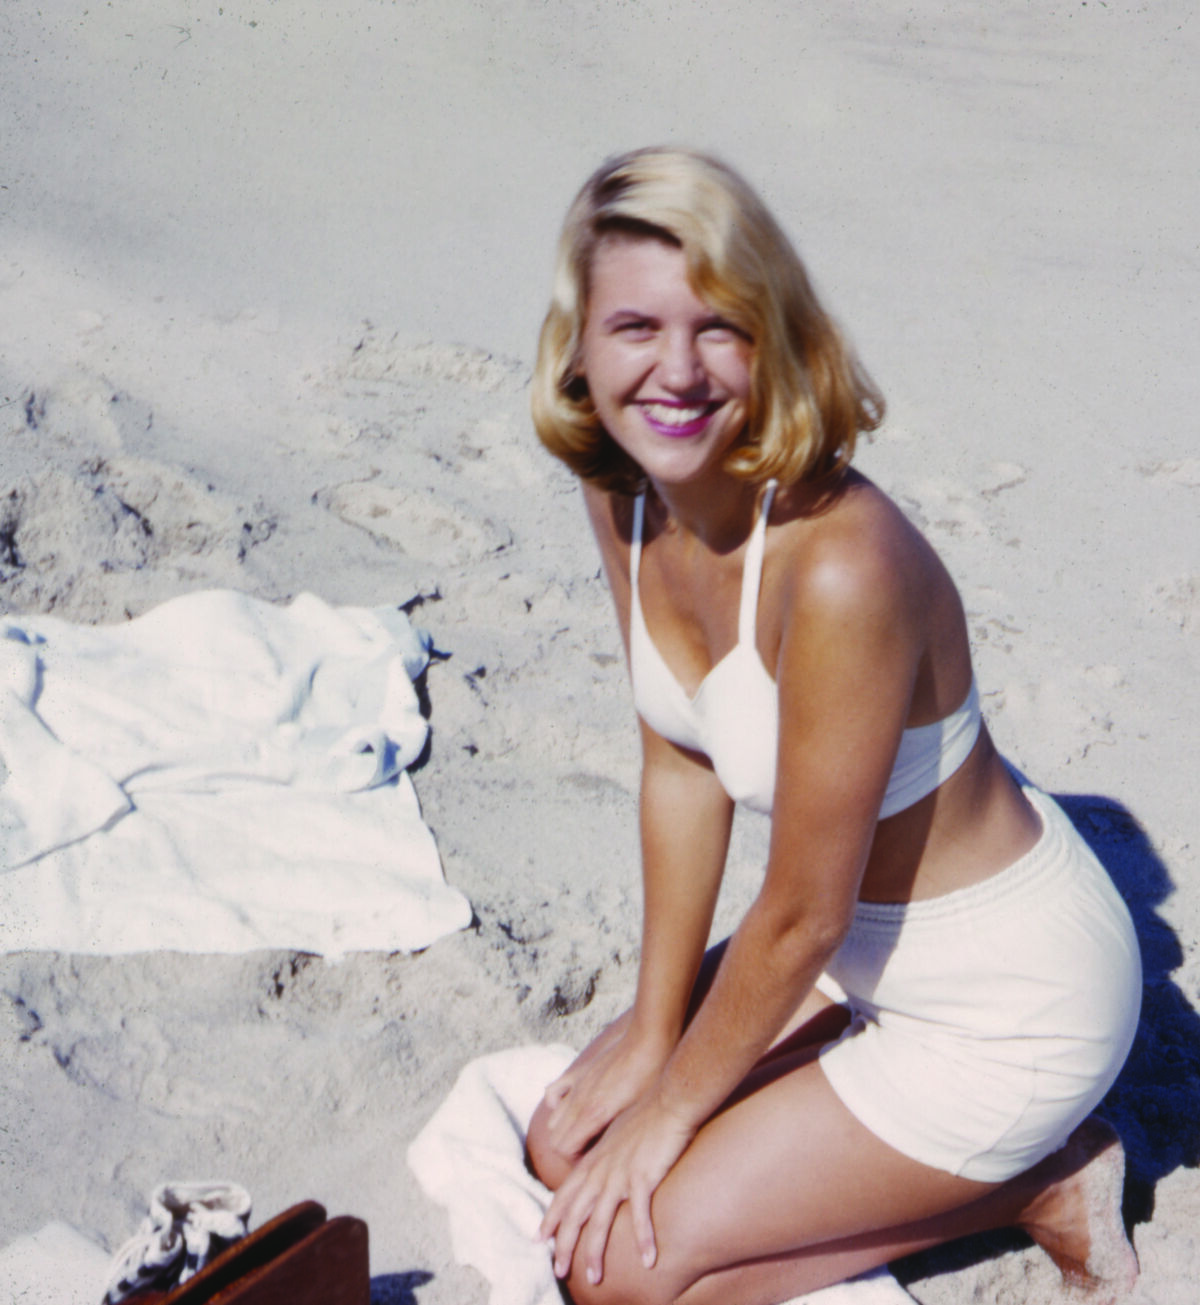 Sylvia Plath (c) Estate of Gordon Lameyer, courtesy of the Lilly Library